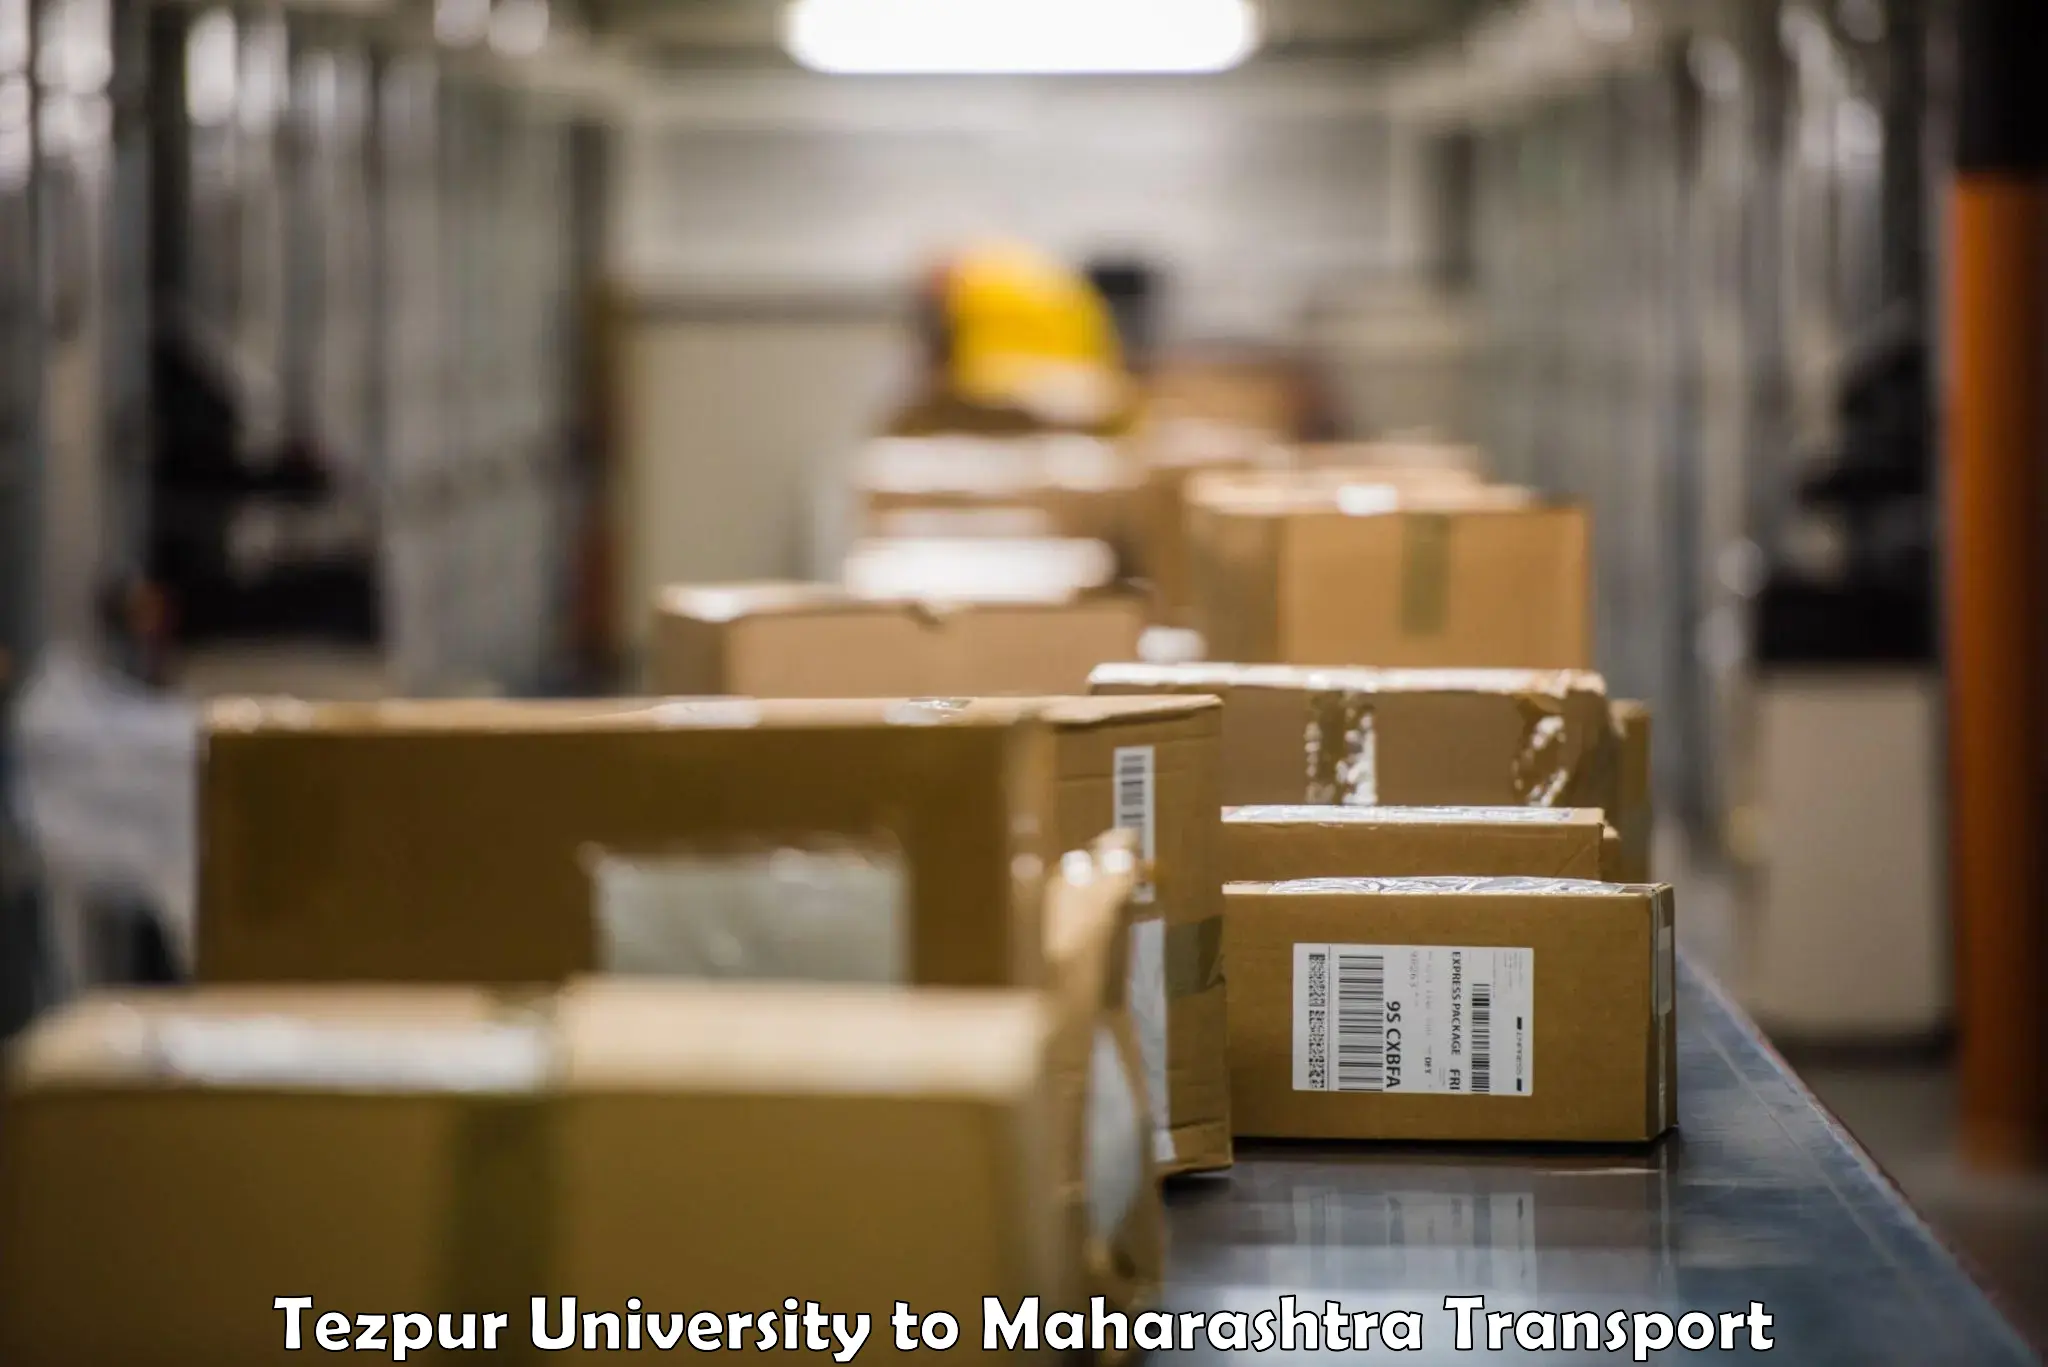 Vehicle parcel service Tezpur University to Dharmabad